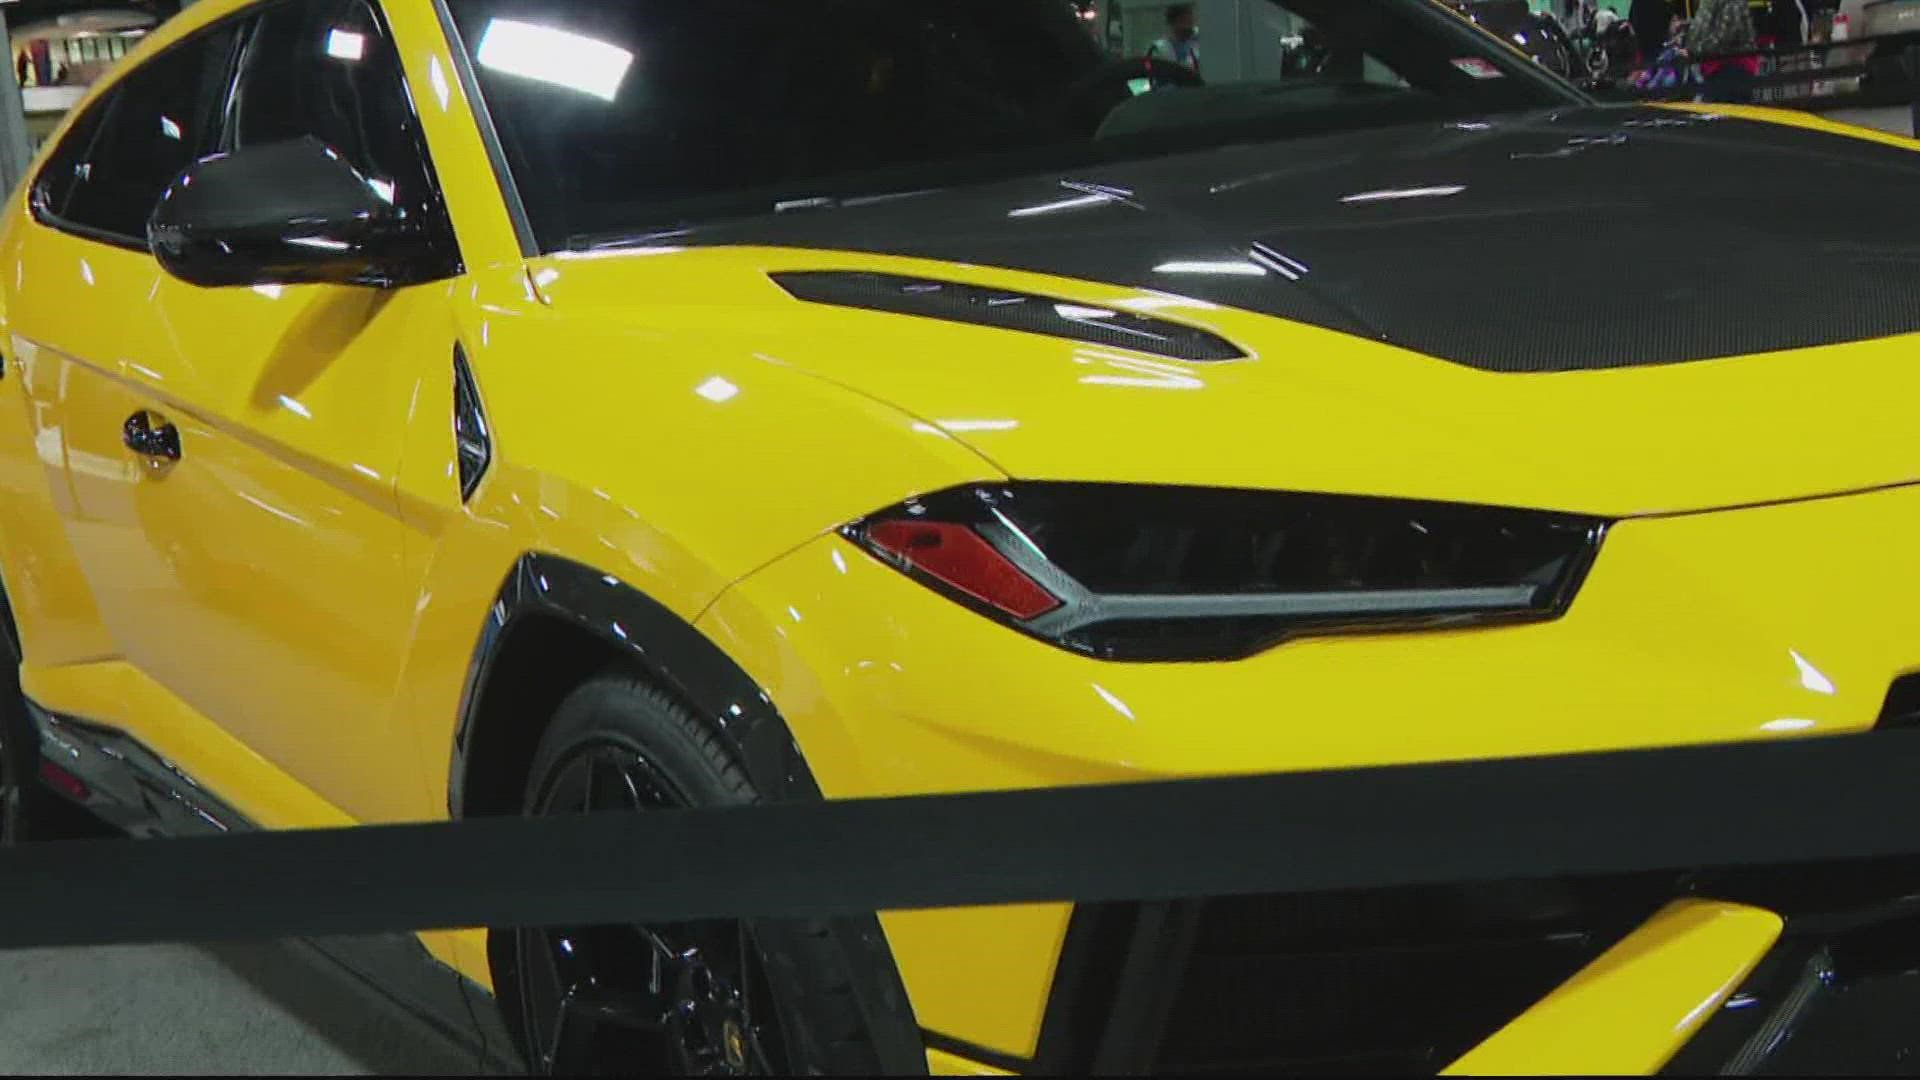 It's one of the largest indoor auto shows in all of north America.